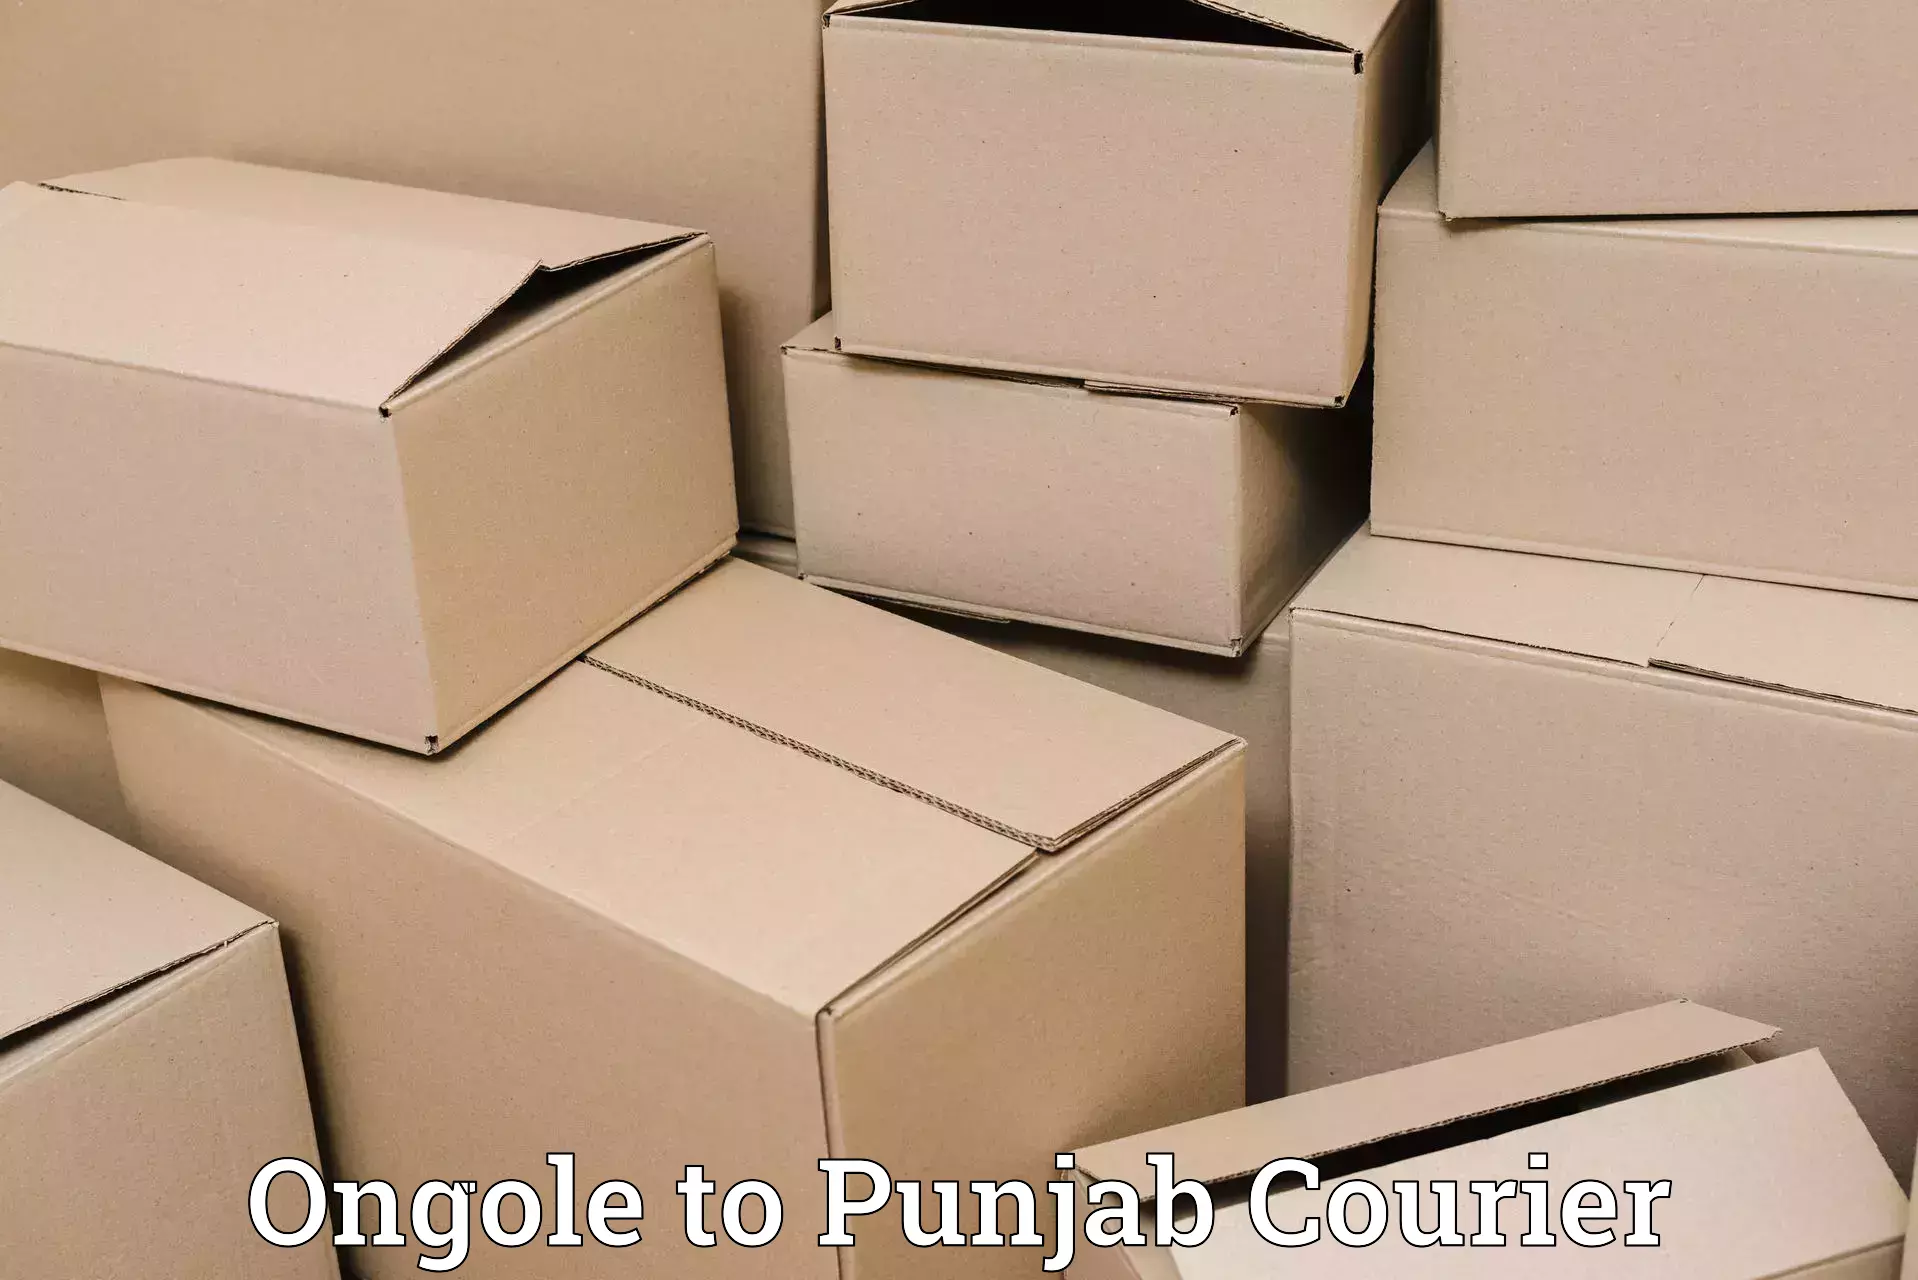 Seamless shipping experience Ongole to Pathankot